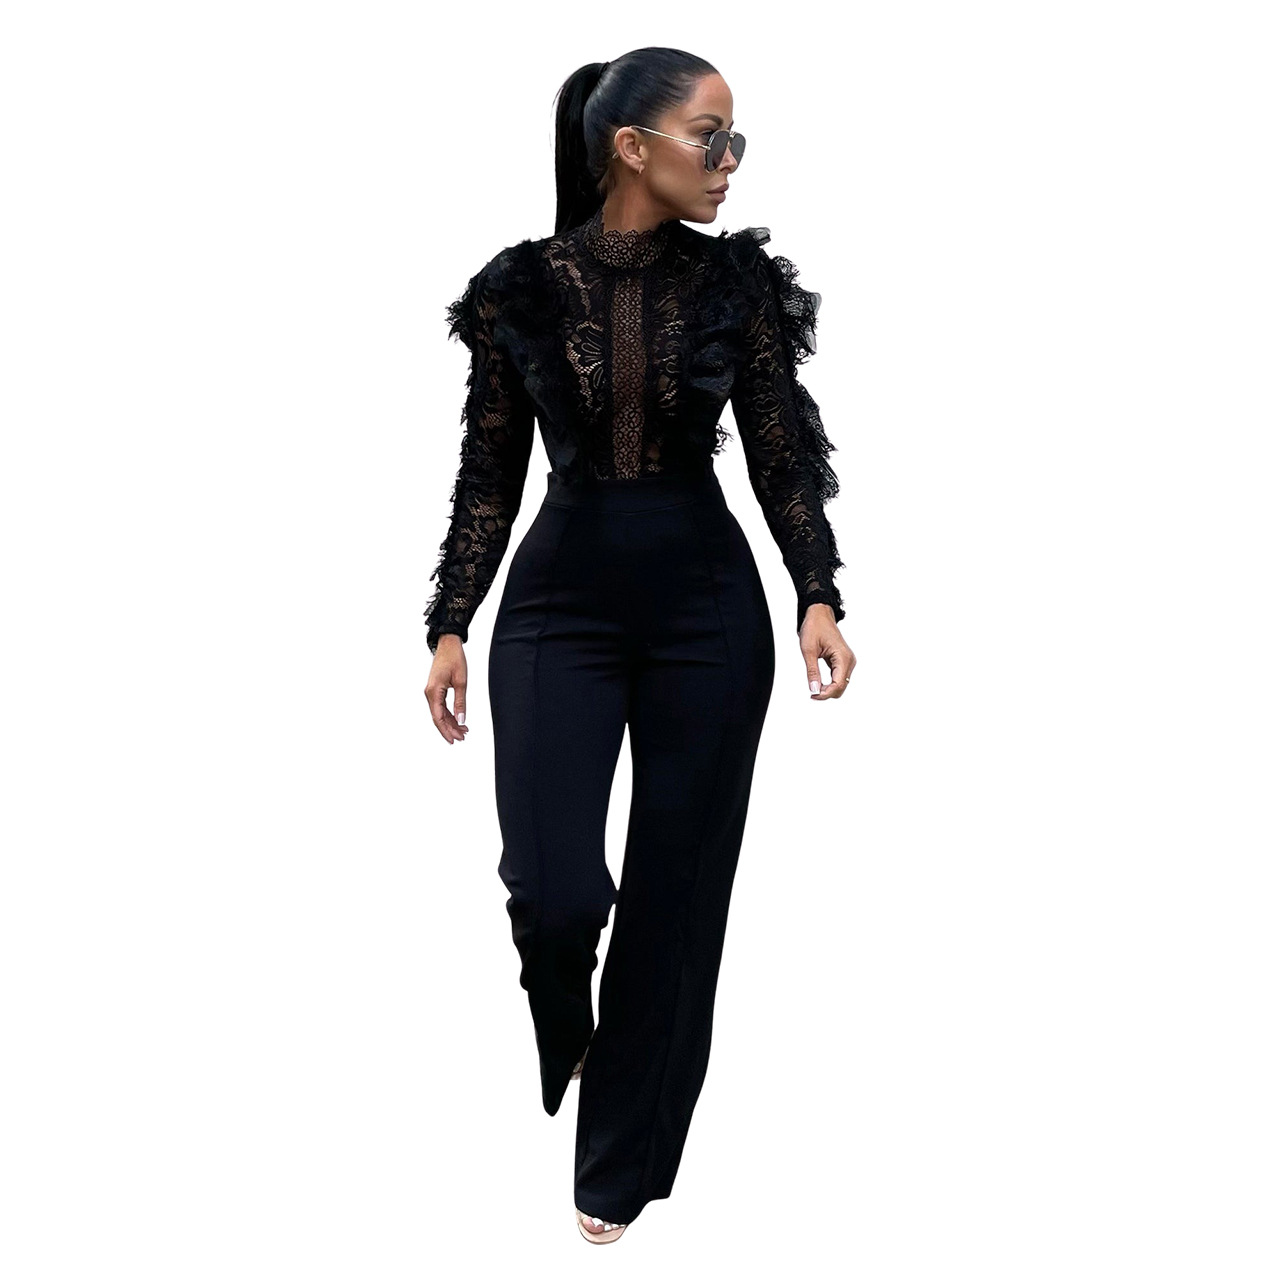 Women Elegant Long Sleeve O-neck Ruffle Patchwork Tassel Rompers Autumn Sexy Lace Through Night Club Party Jumpsuits